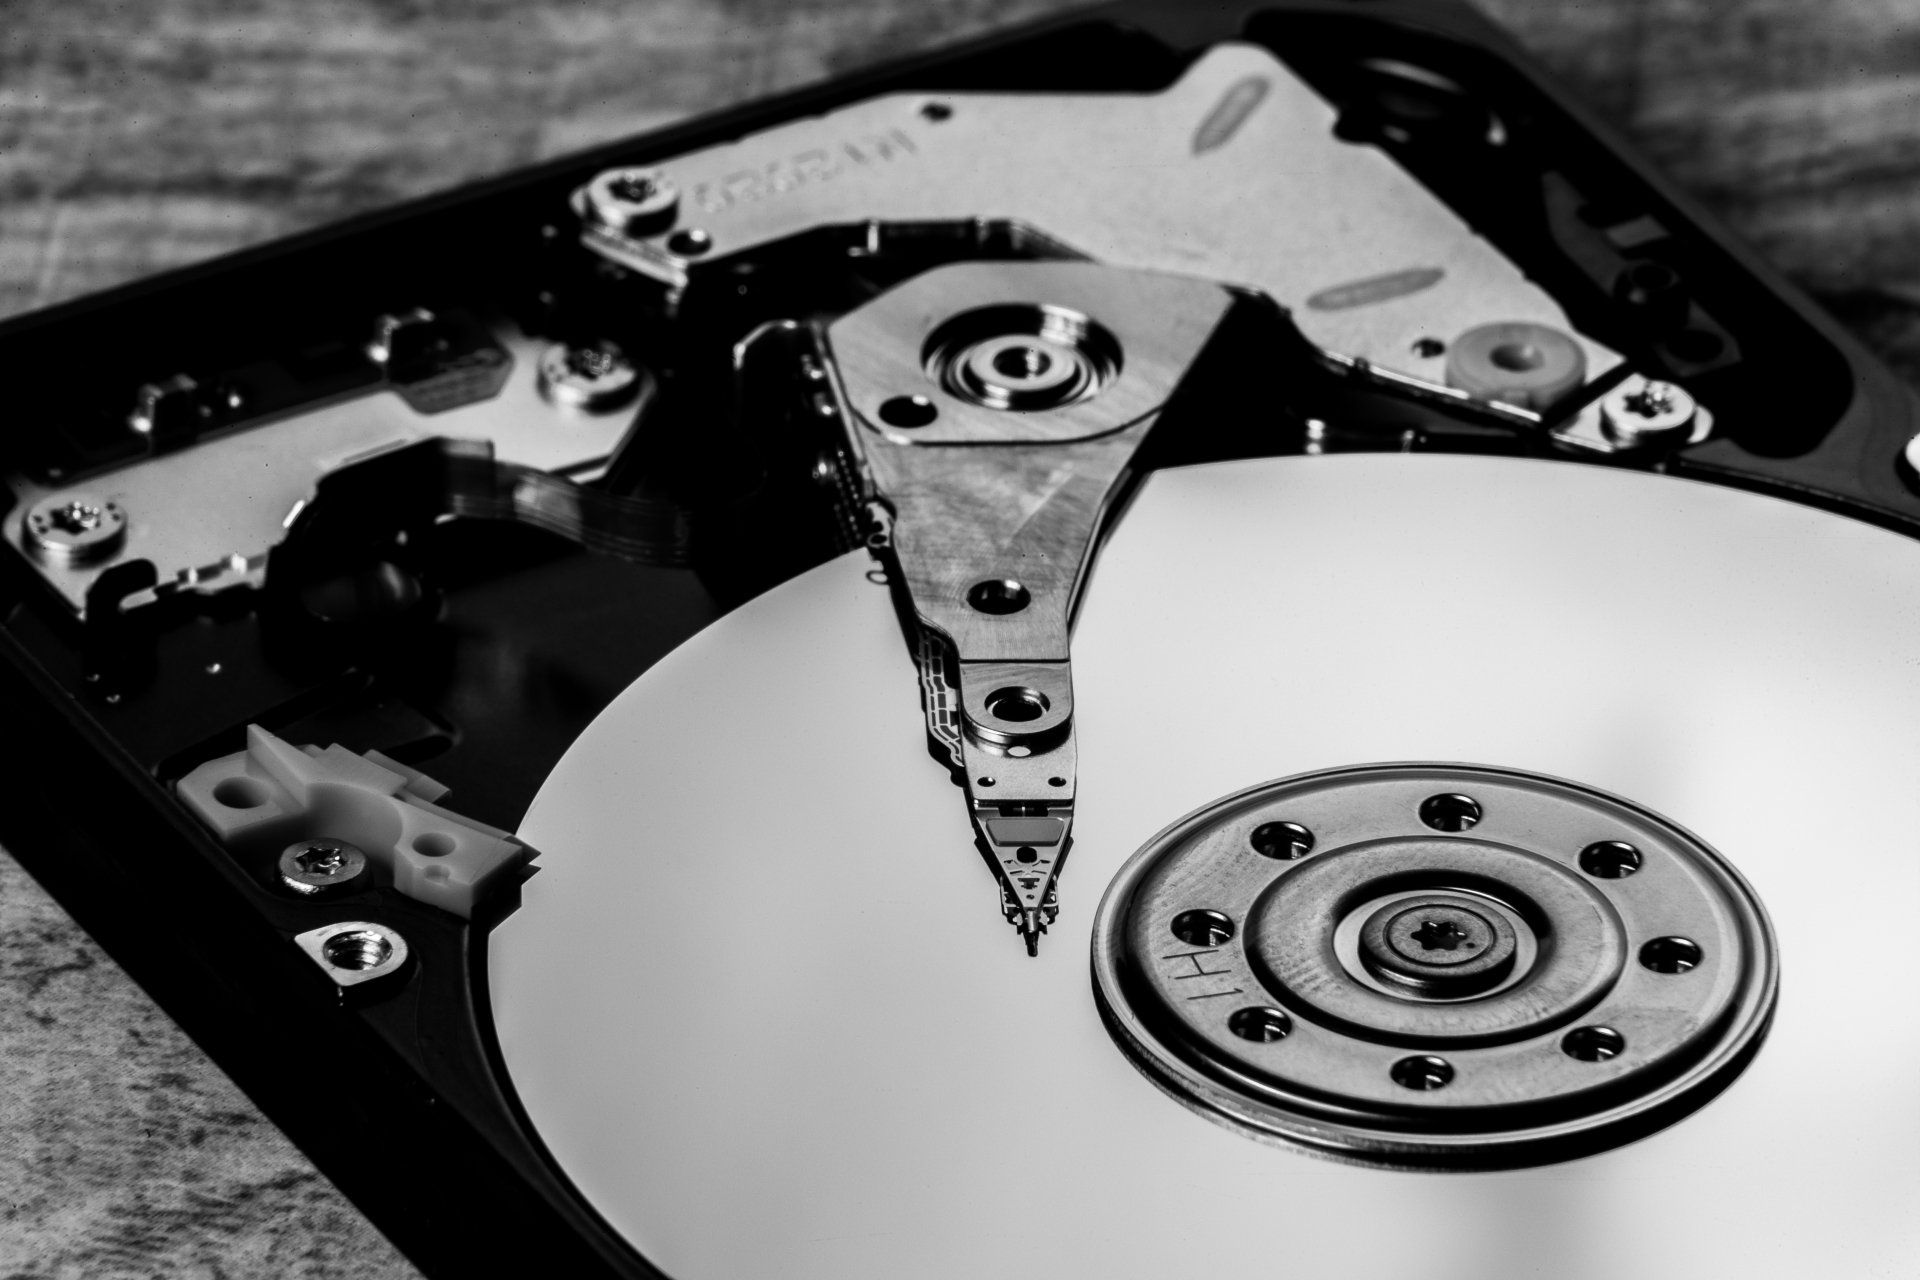 A black and white photo of the inside of a hard drive.